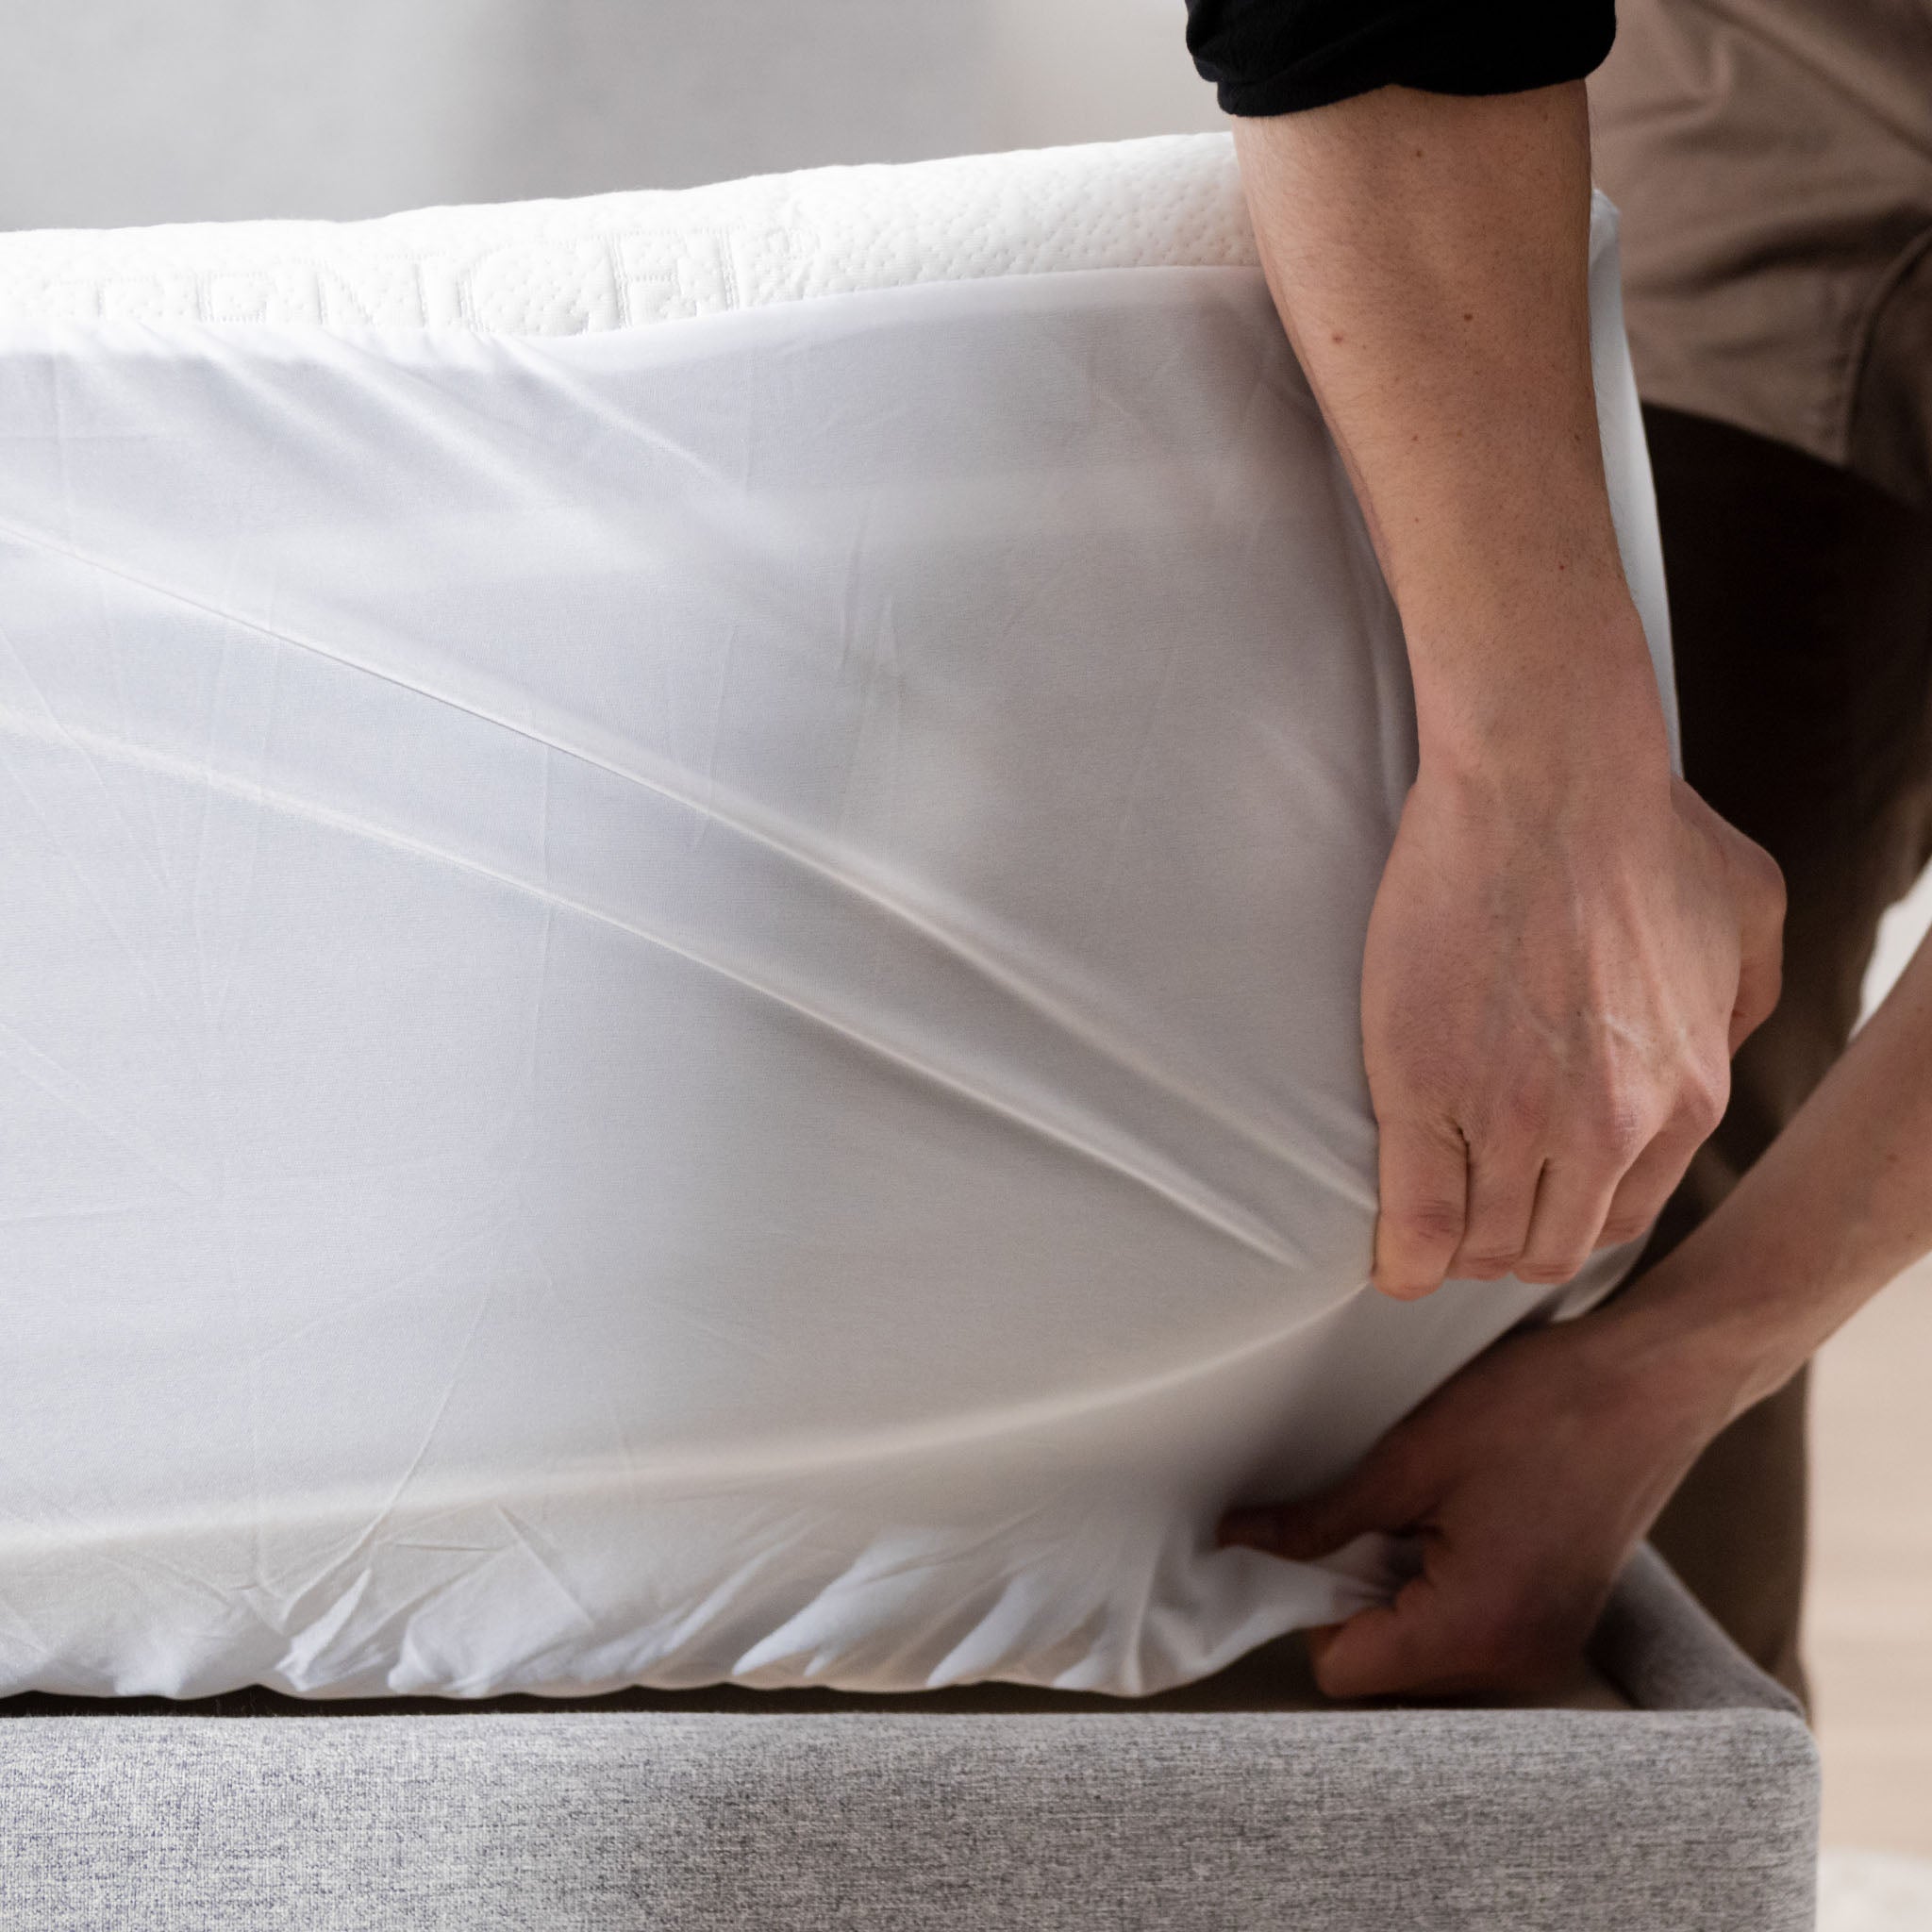 What Are Mattress Toppers and Mattress Protectors?